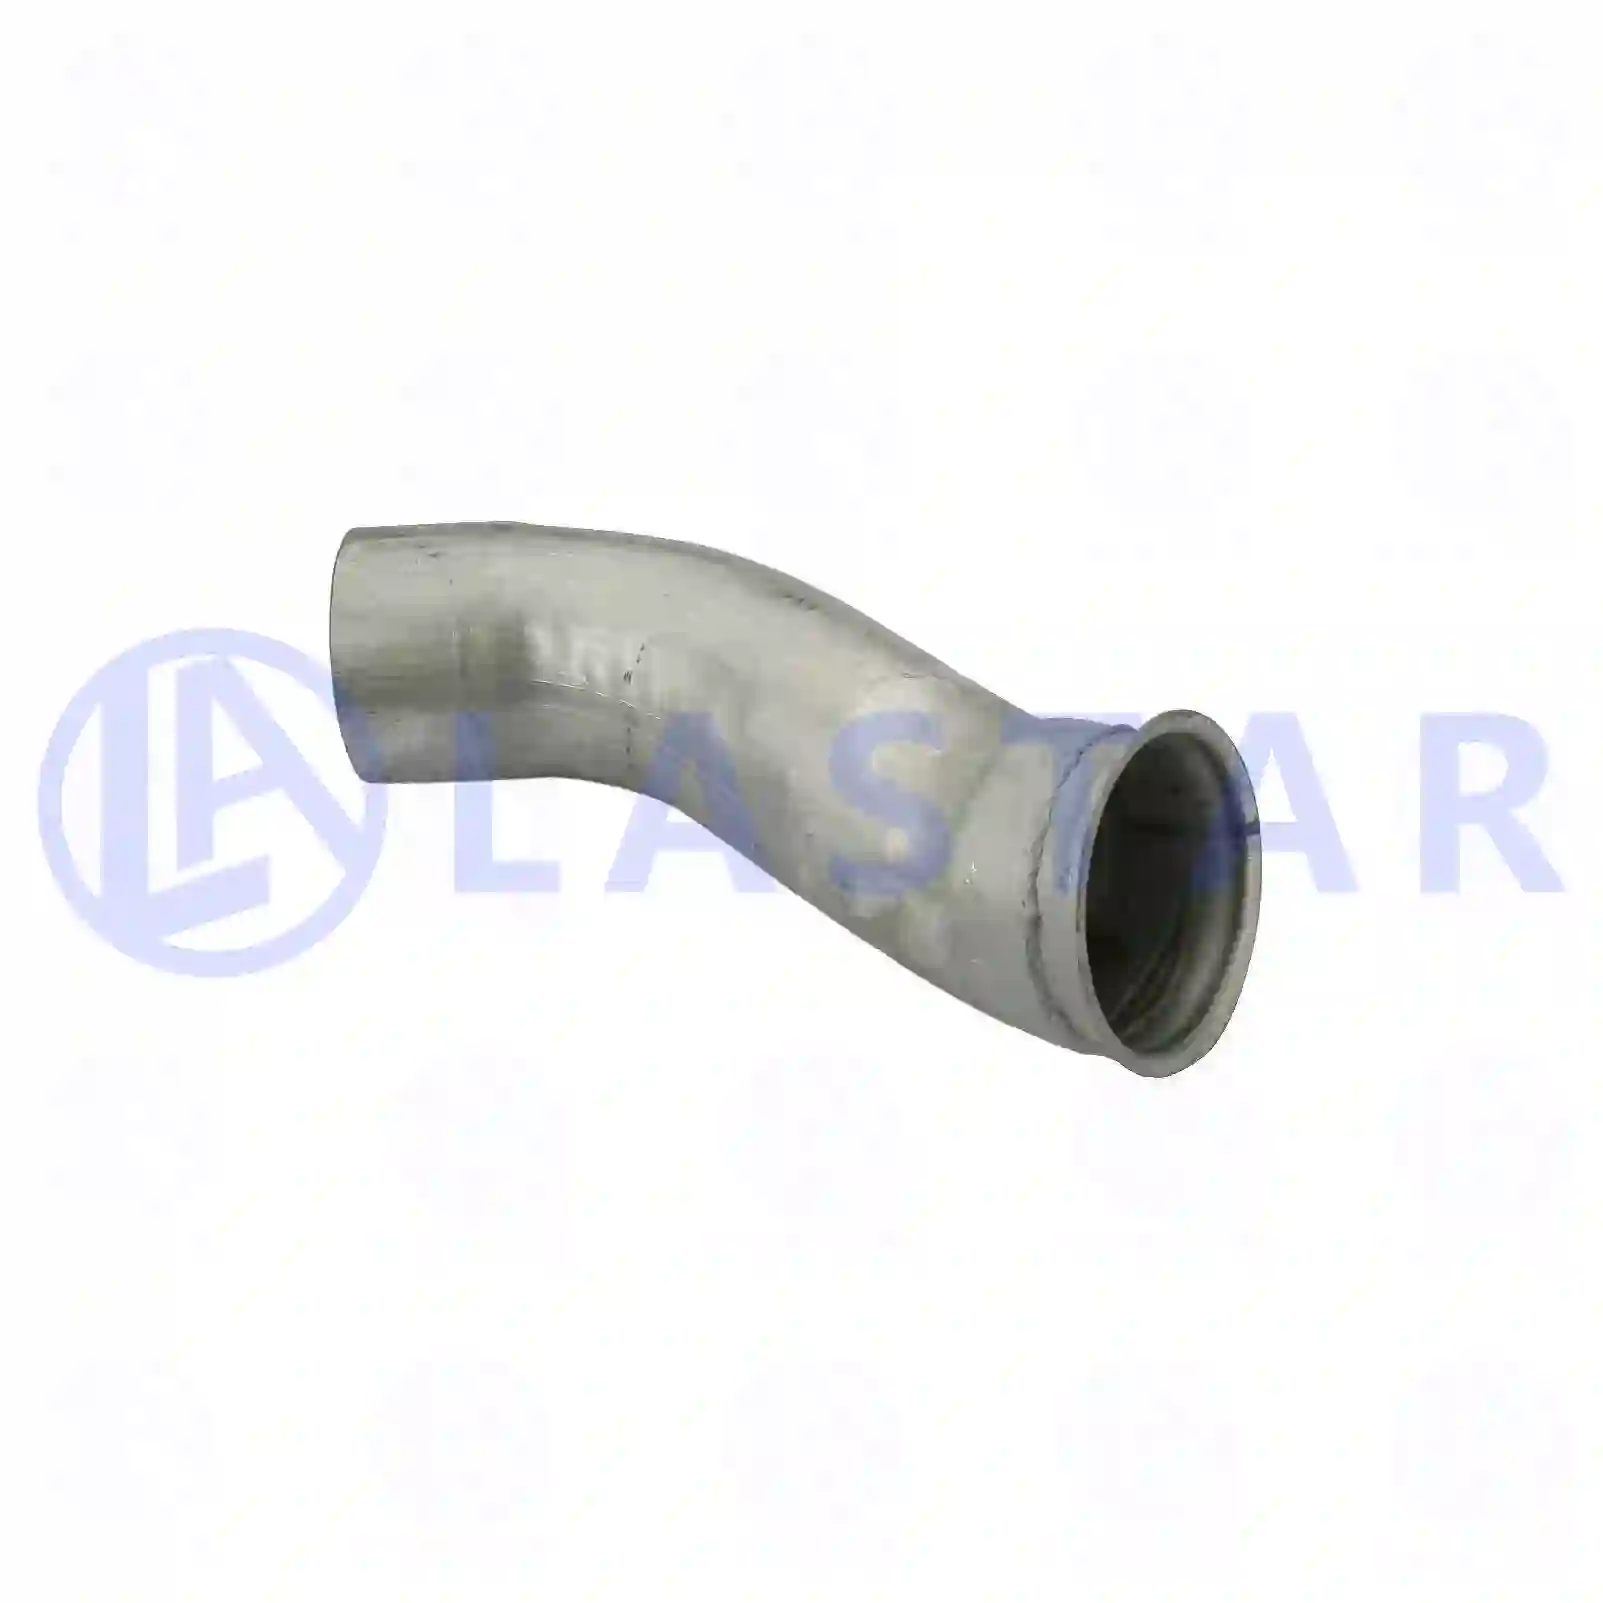 Front exhaust pipe, 77706639, 7401629939, 1629939, ZG10332-0008 ||  77706639 Lastar Spare Part | Truck Spare Parts, Auotomotive Spare Parts Front exhaust pipe, 77706639, 7401629939, 1629939, ZG10332-0008 ||  77706639 Lastar Spare Part | Truck Spare Parts, Auotomotive Spare Parts